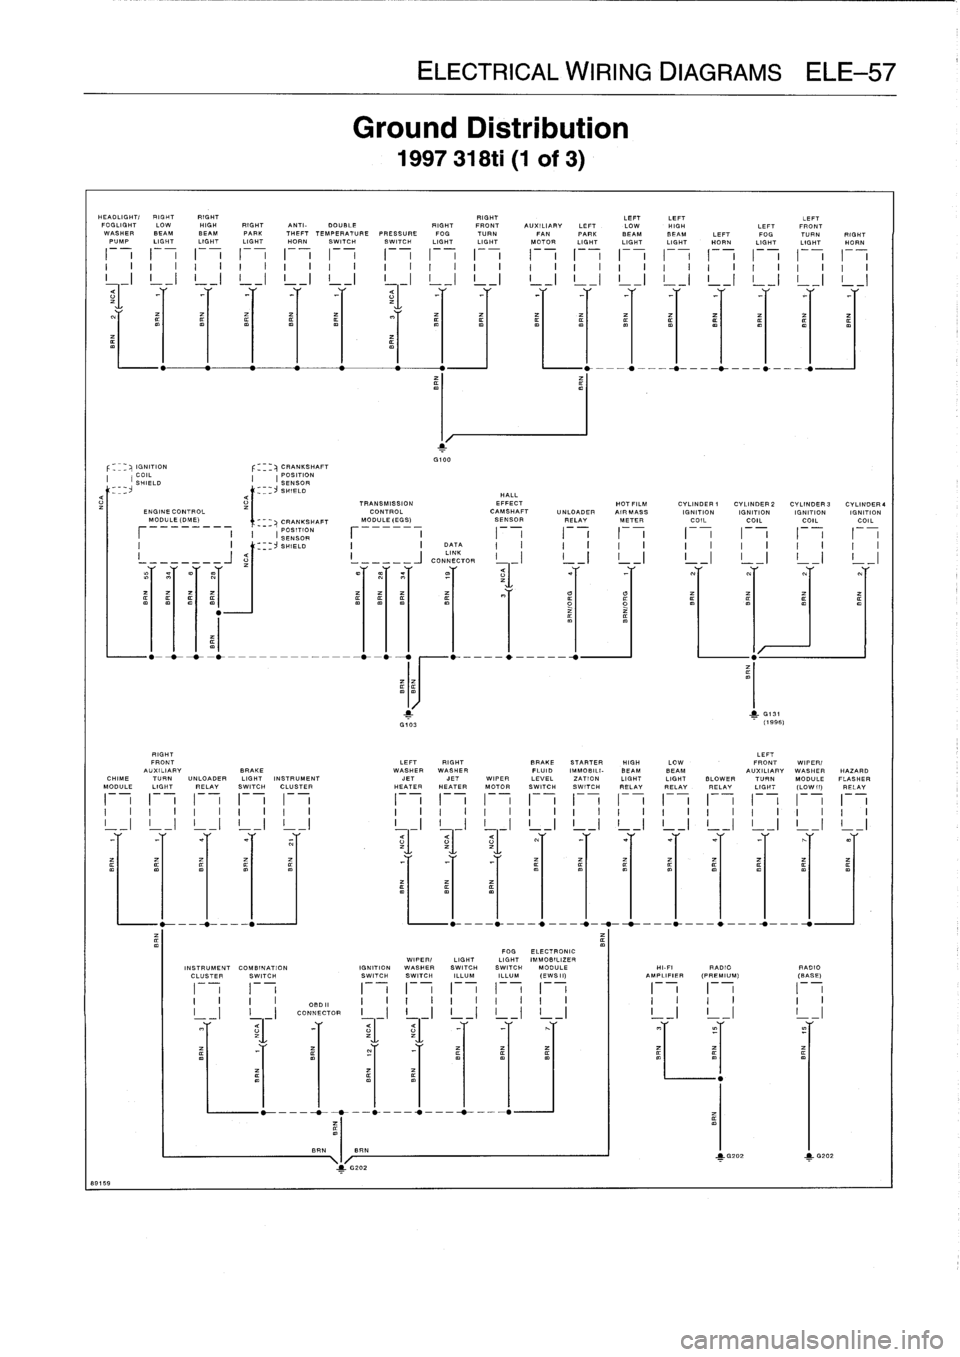 BMW 323i 1995 E36 Service Manual 
Ground
Distribution

1997
318ti
(1
of
3)

HEADLIGHT/RIGHTRIGHT

	

RIGHT

	

LEFTLEFT

	

LEFT

89159

FOGLIGHT
LOW
HIGH
RIGHT
ANTI-
DOUBLE

	

RIGHT
FRONT
AUXILIARY
LEFT
LOW
HIGH

	

LEFT
FRONT
WASH